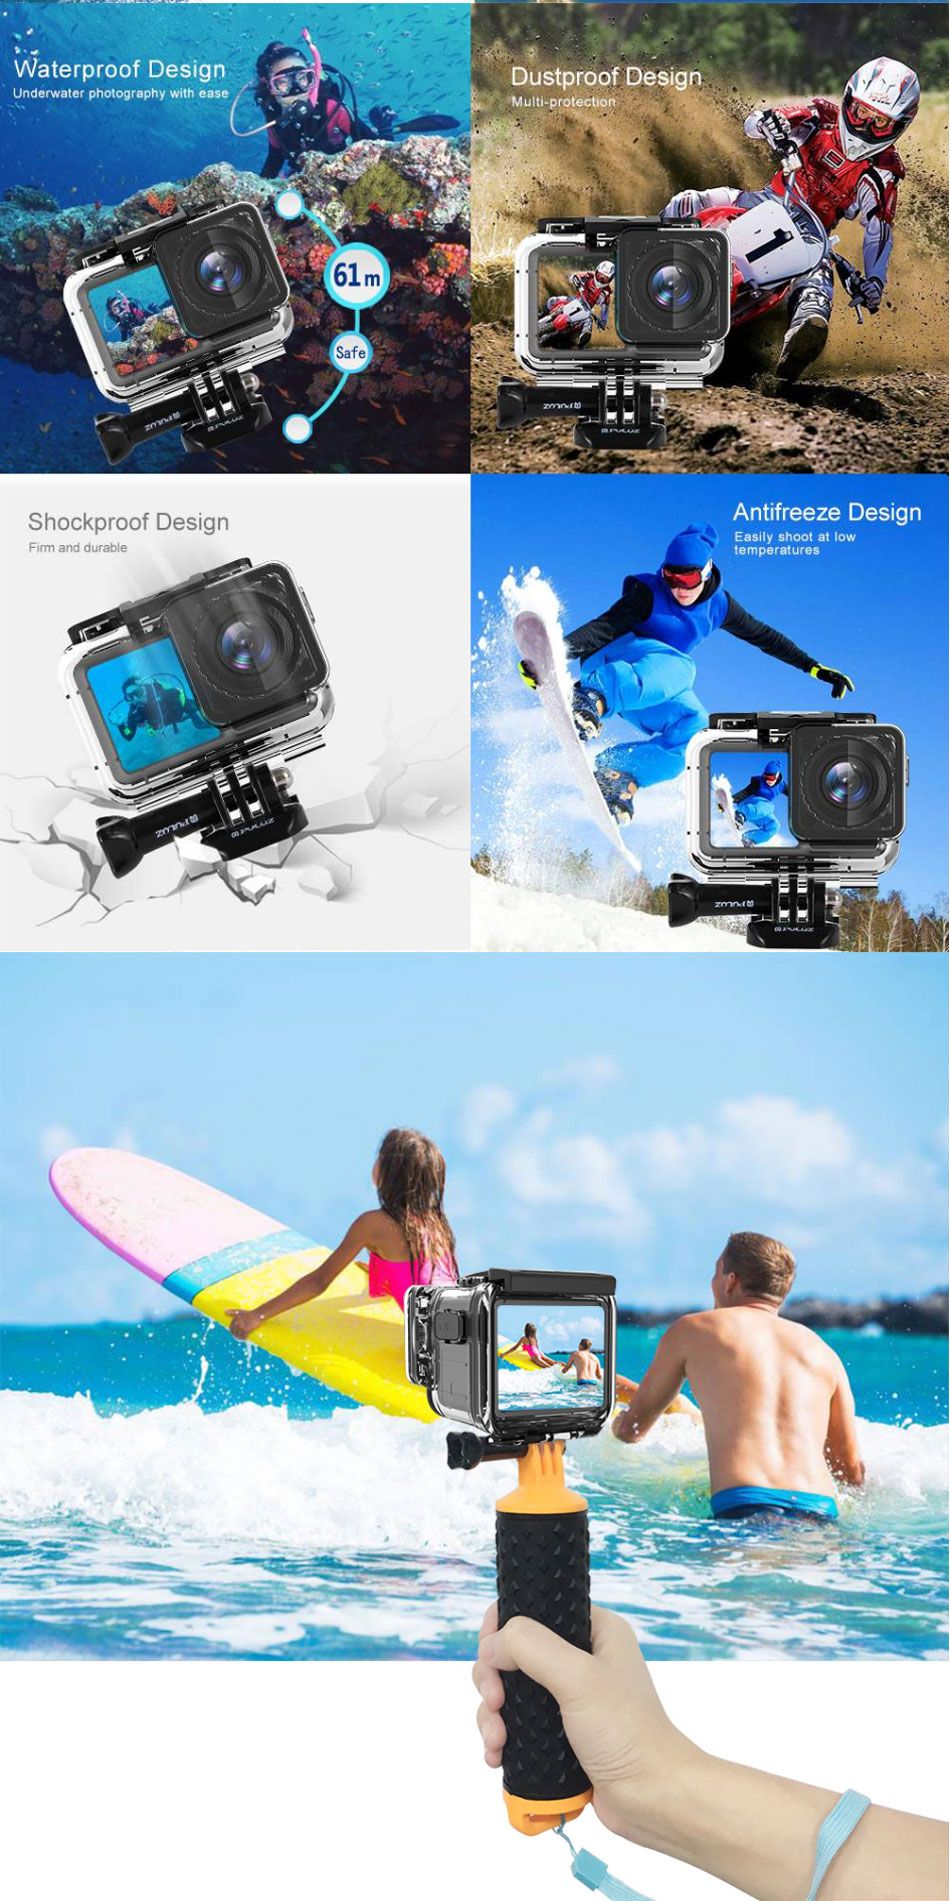 PULUZ-PU398-61M-Underwater-Waterproof-Diving-Swimming-Protective-Case-Shell-for-DJI-OSMO-Action-Spor-1537305